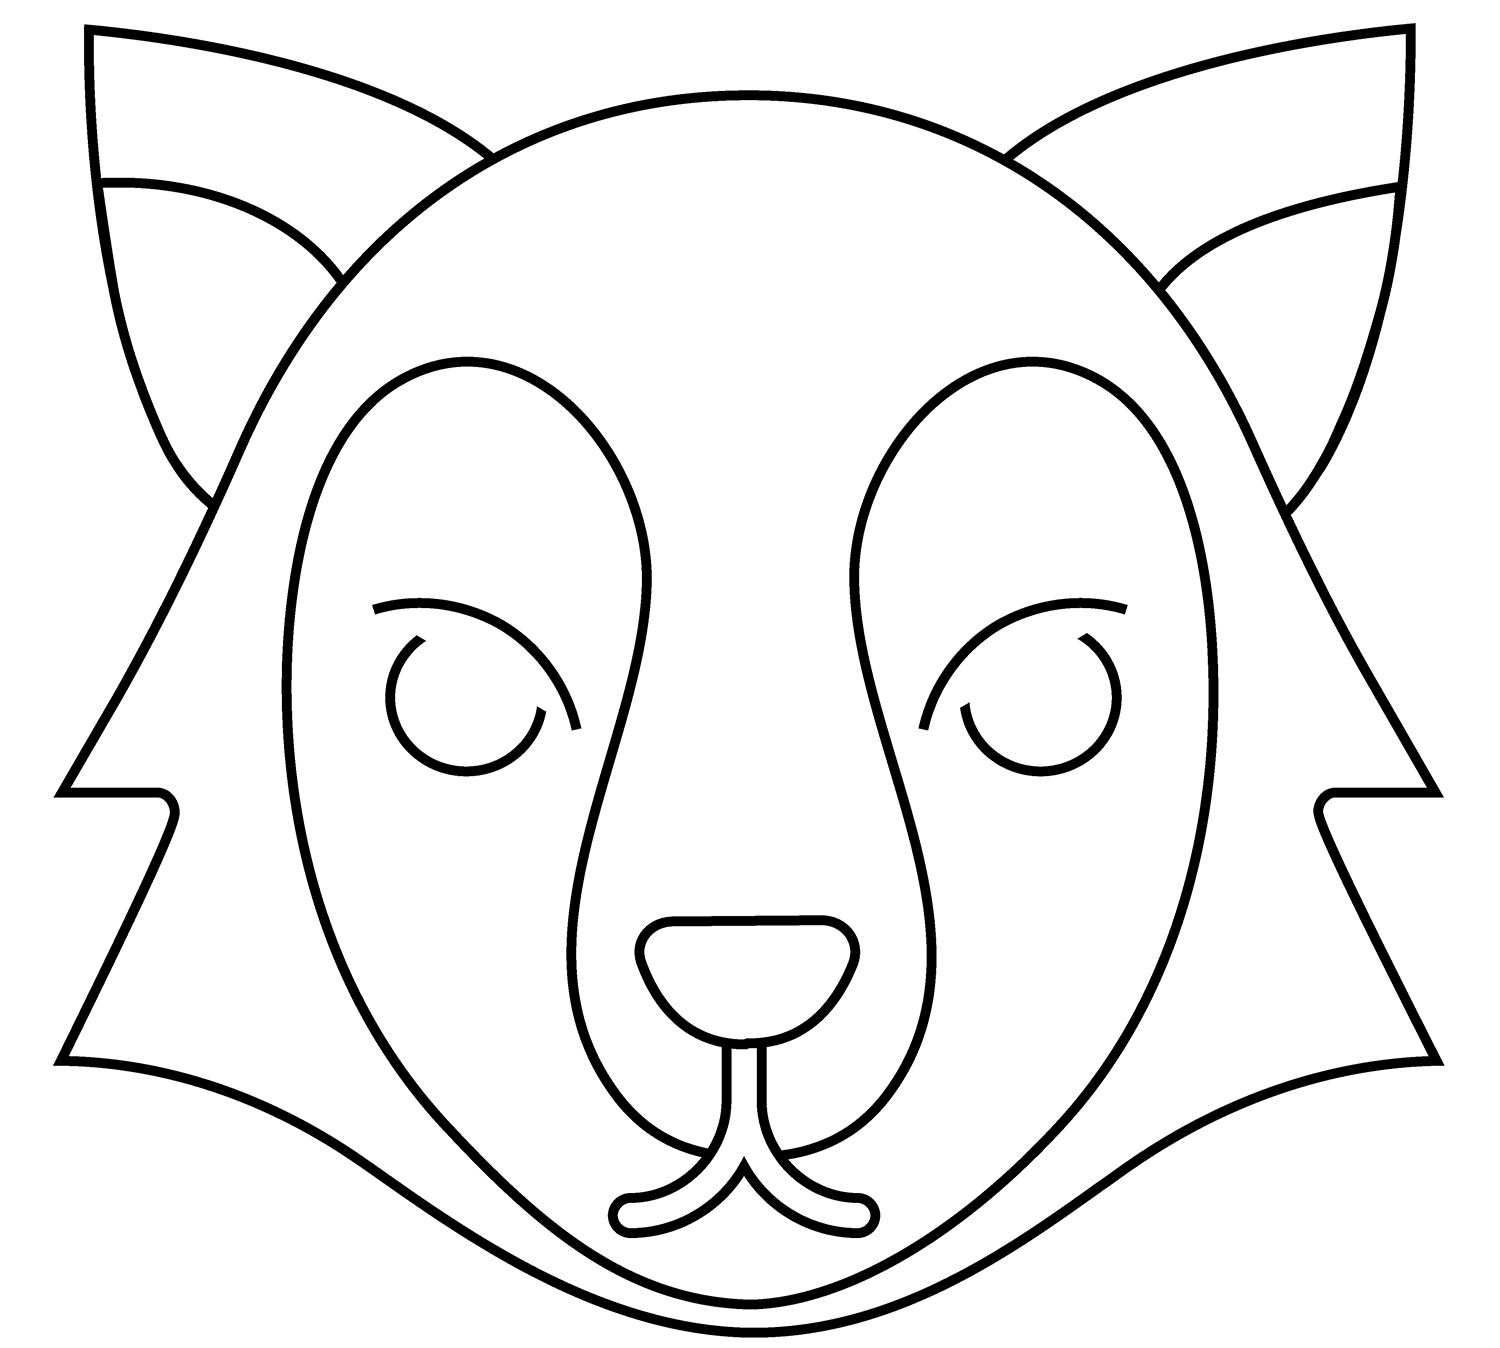 Wolf Emoji coloring page - ColouringPages